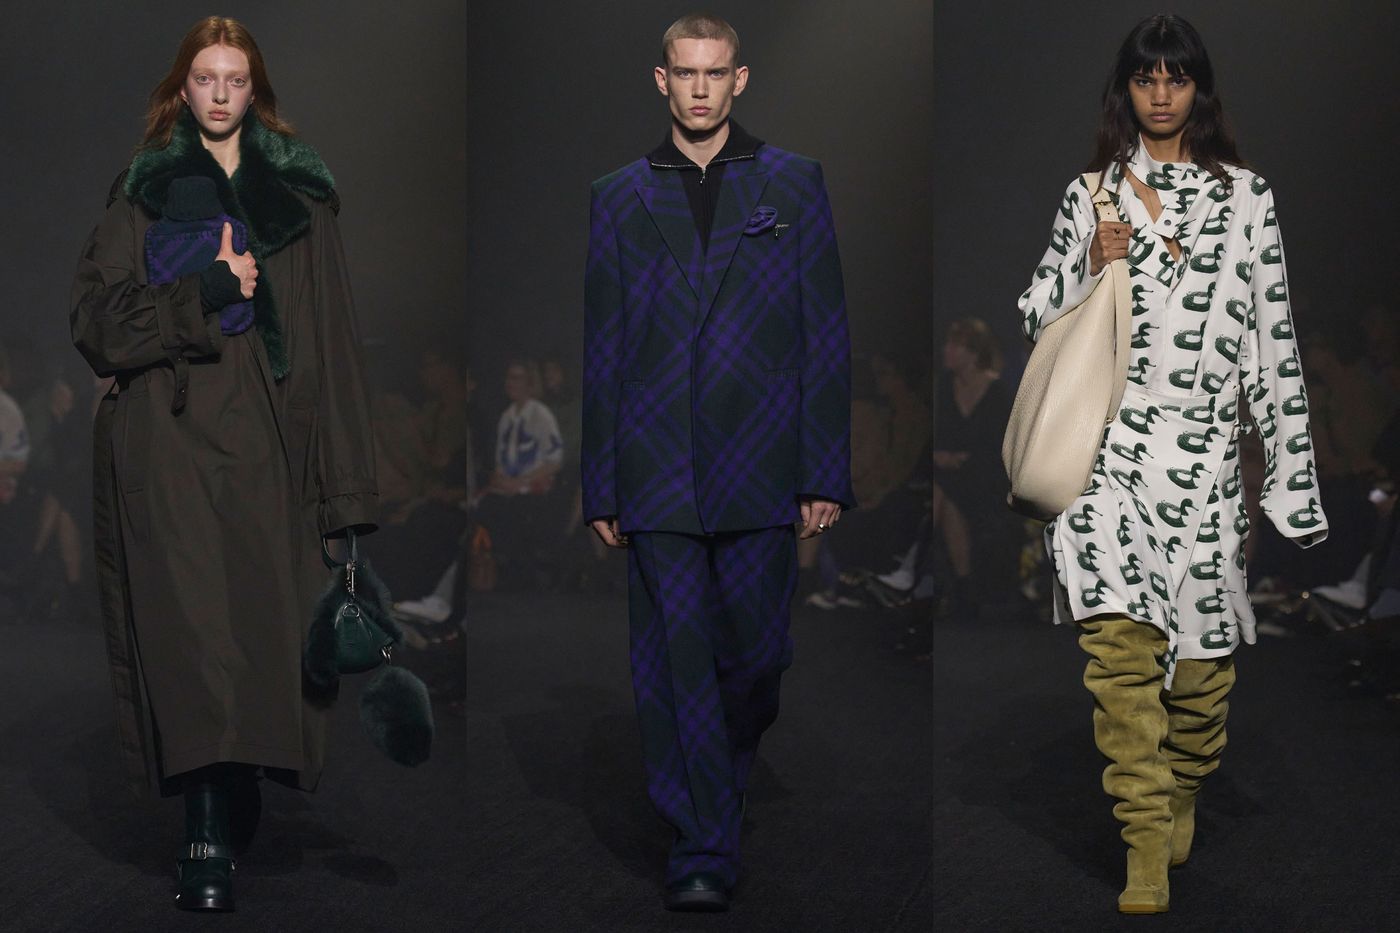 Burberry brings it back home with a twist at London fashion week, Burberry